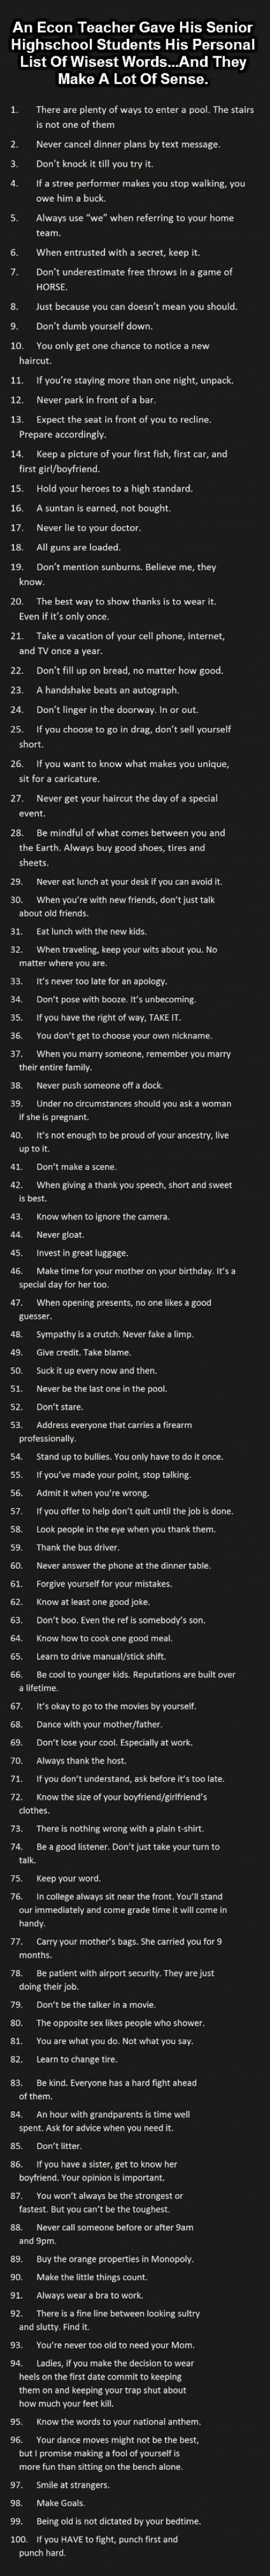 An econ teacher gave his senior high school students his personal list of wisest words….and they make a lot of sense.